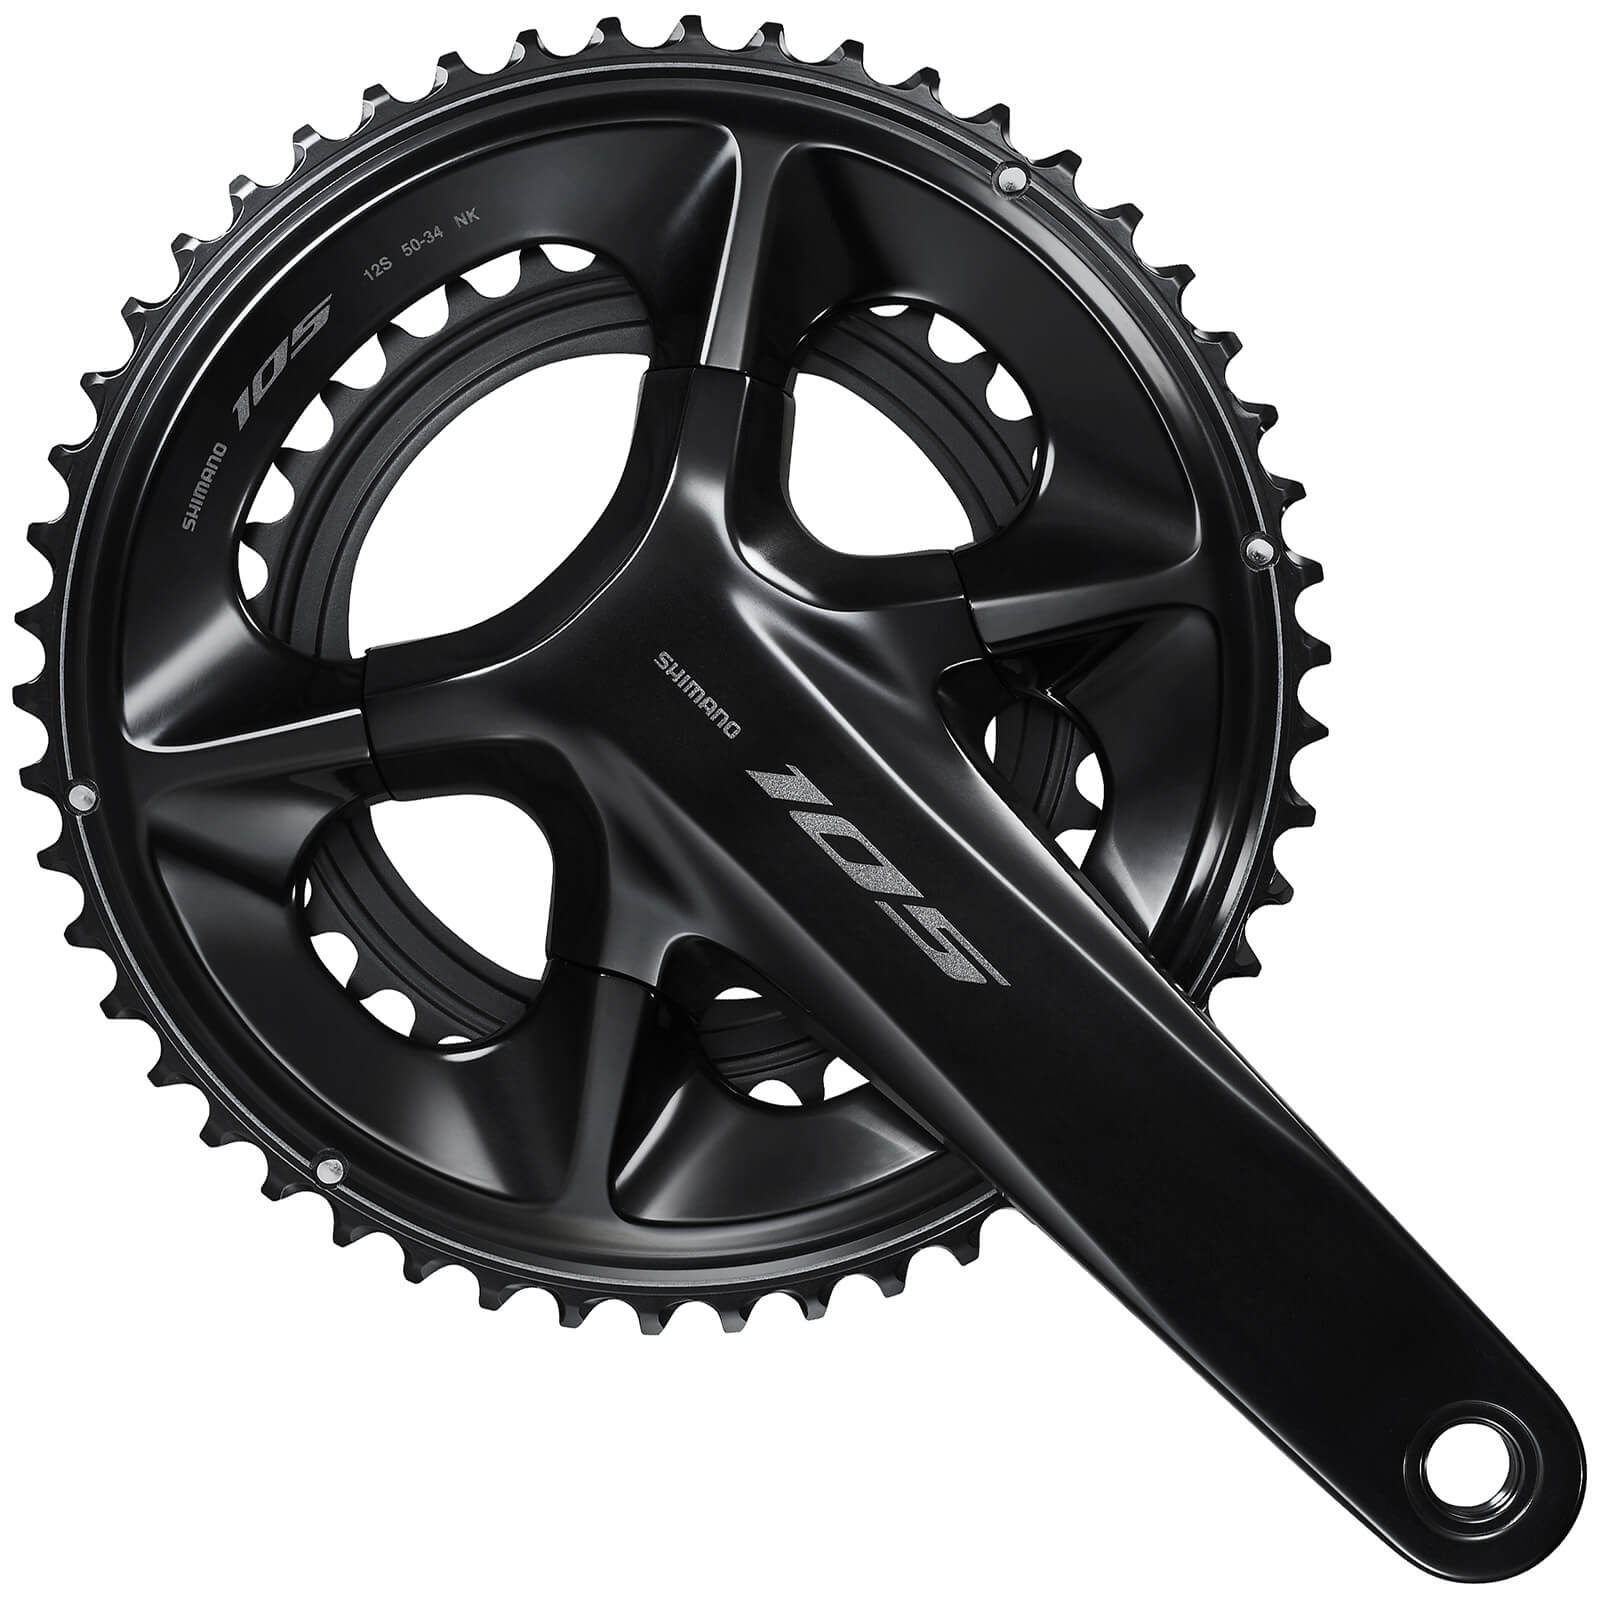 Shimano 105 FC-R7100 12 Speed Chainset - 172.5mm - 50/34